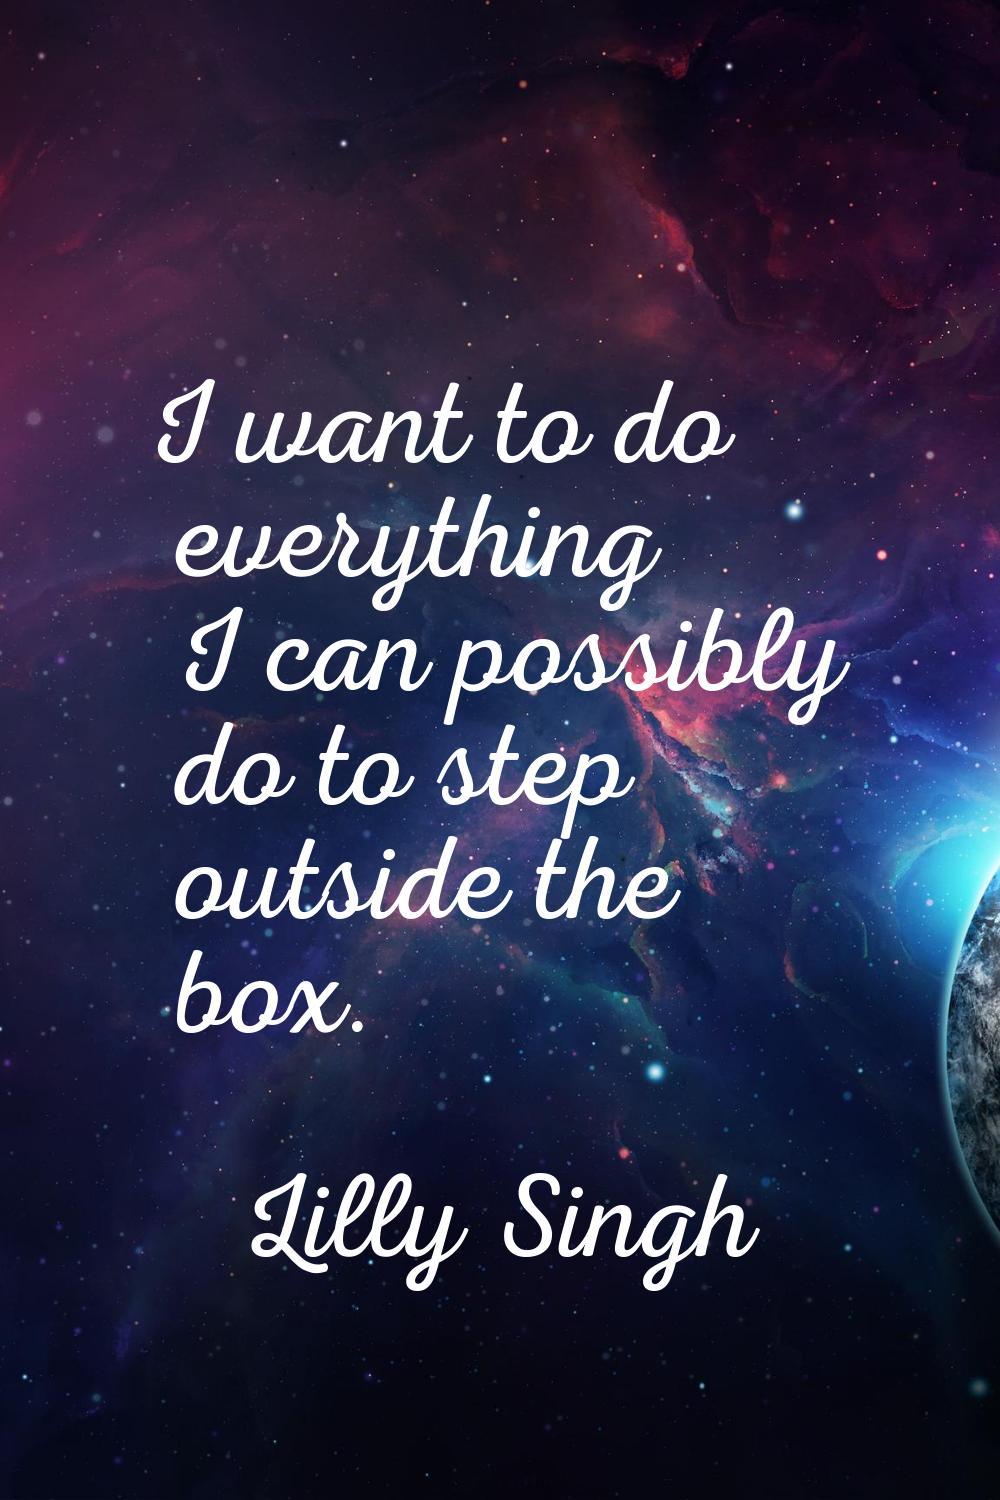 I want to do everything I can possibly do to step outside the box.